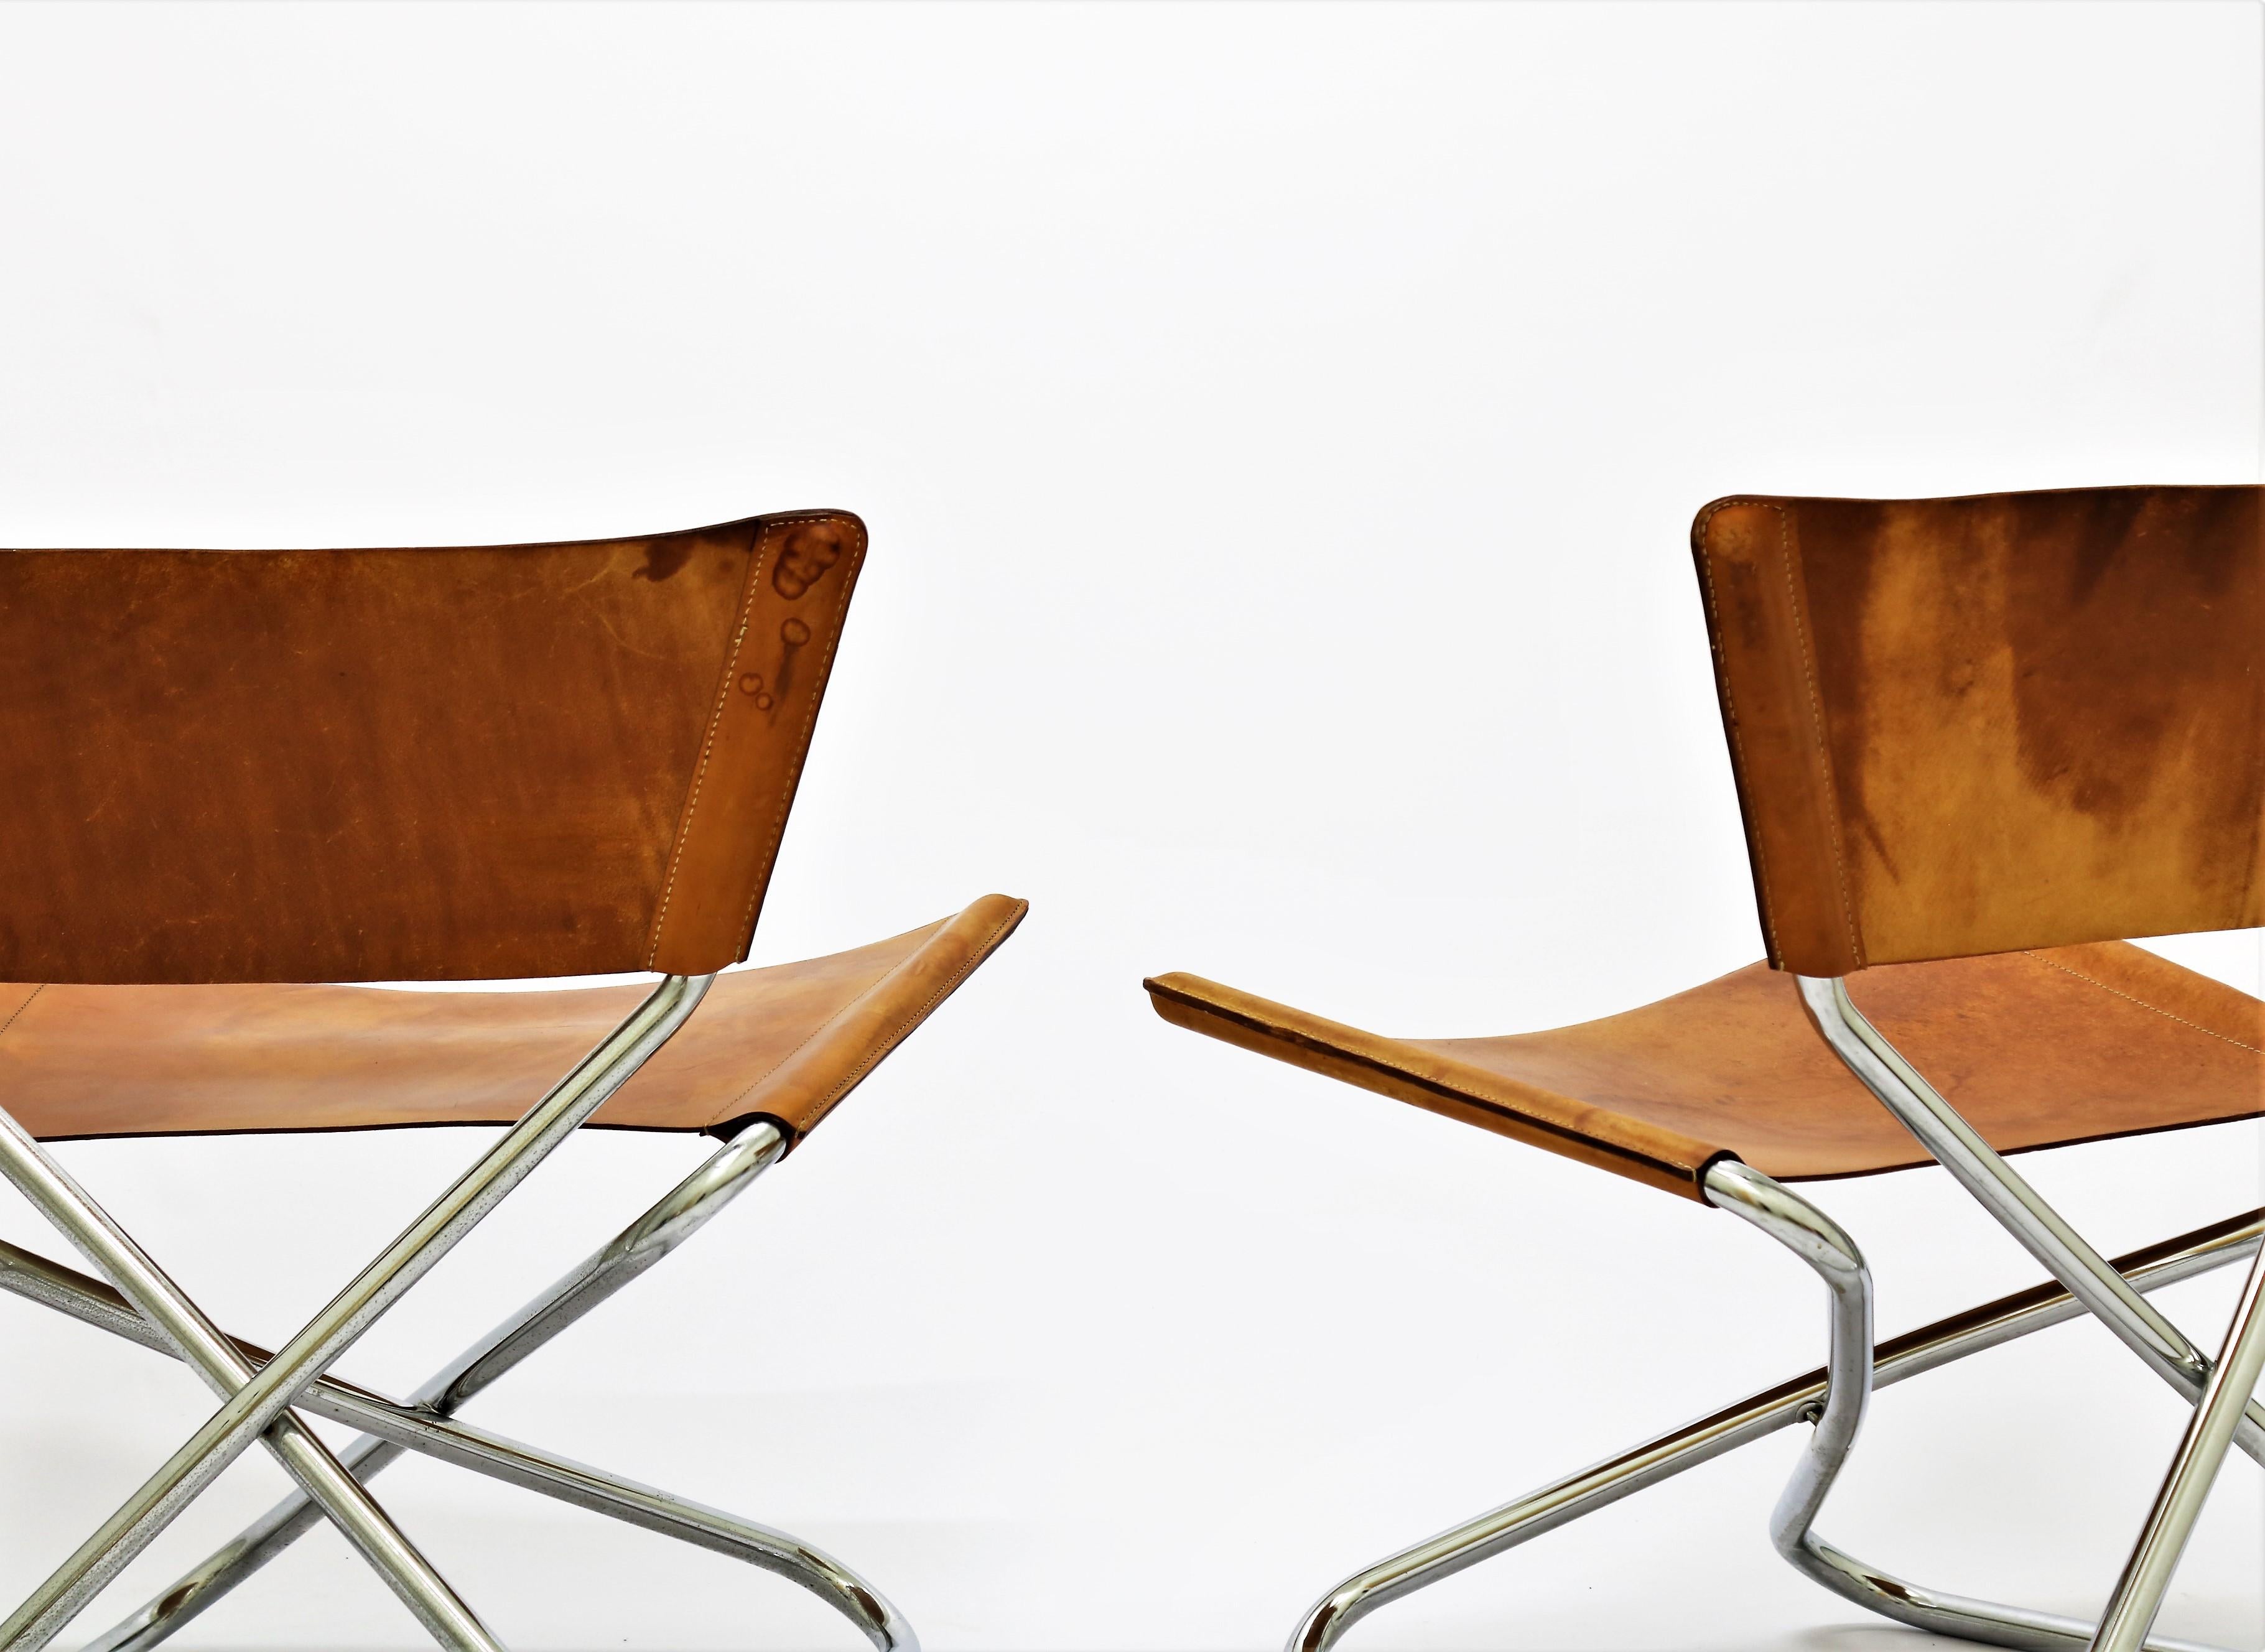 Scandinavian Modern Pair of Lounge Chairs in Saddle Leather and Steel by Erik Magnussen, Denmark